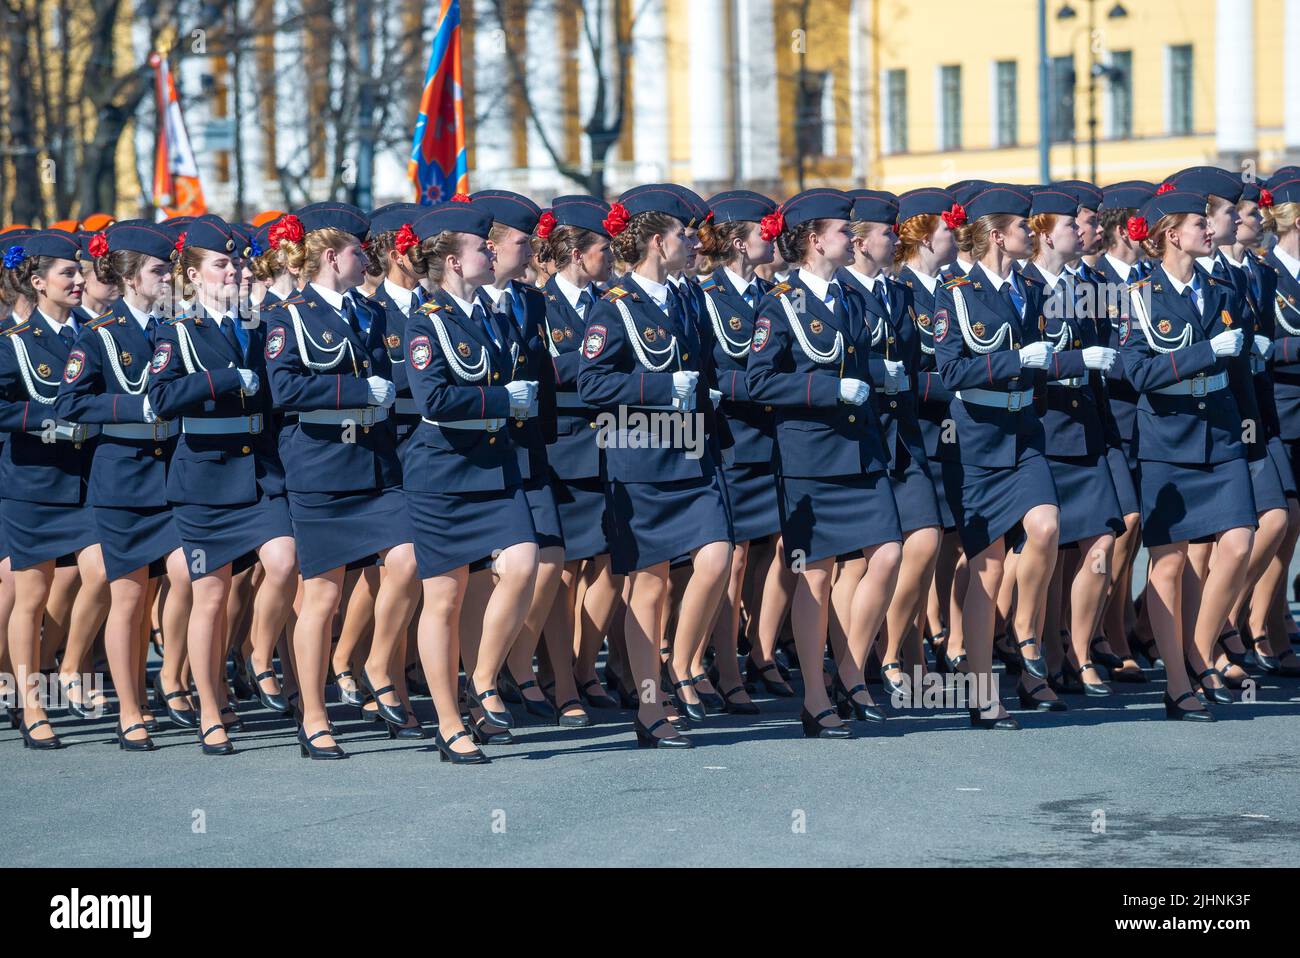 SAINT PETERSBURG, RUSSIA - MAY 06, 2018: Female cadets of the Academy of the Ministry of Internal Affairs march in parade formation. Parade in honor o Stock Photo